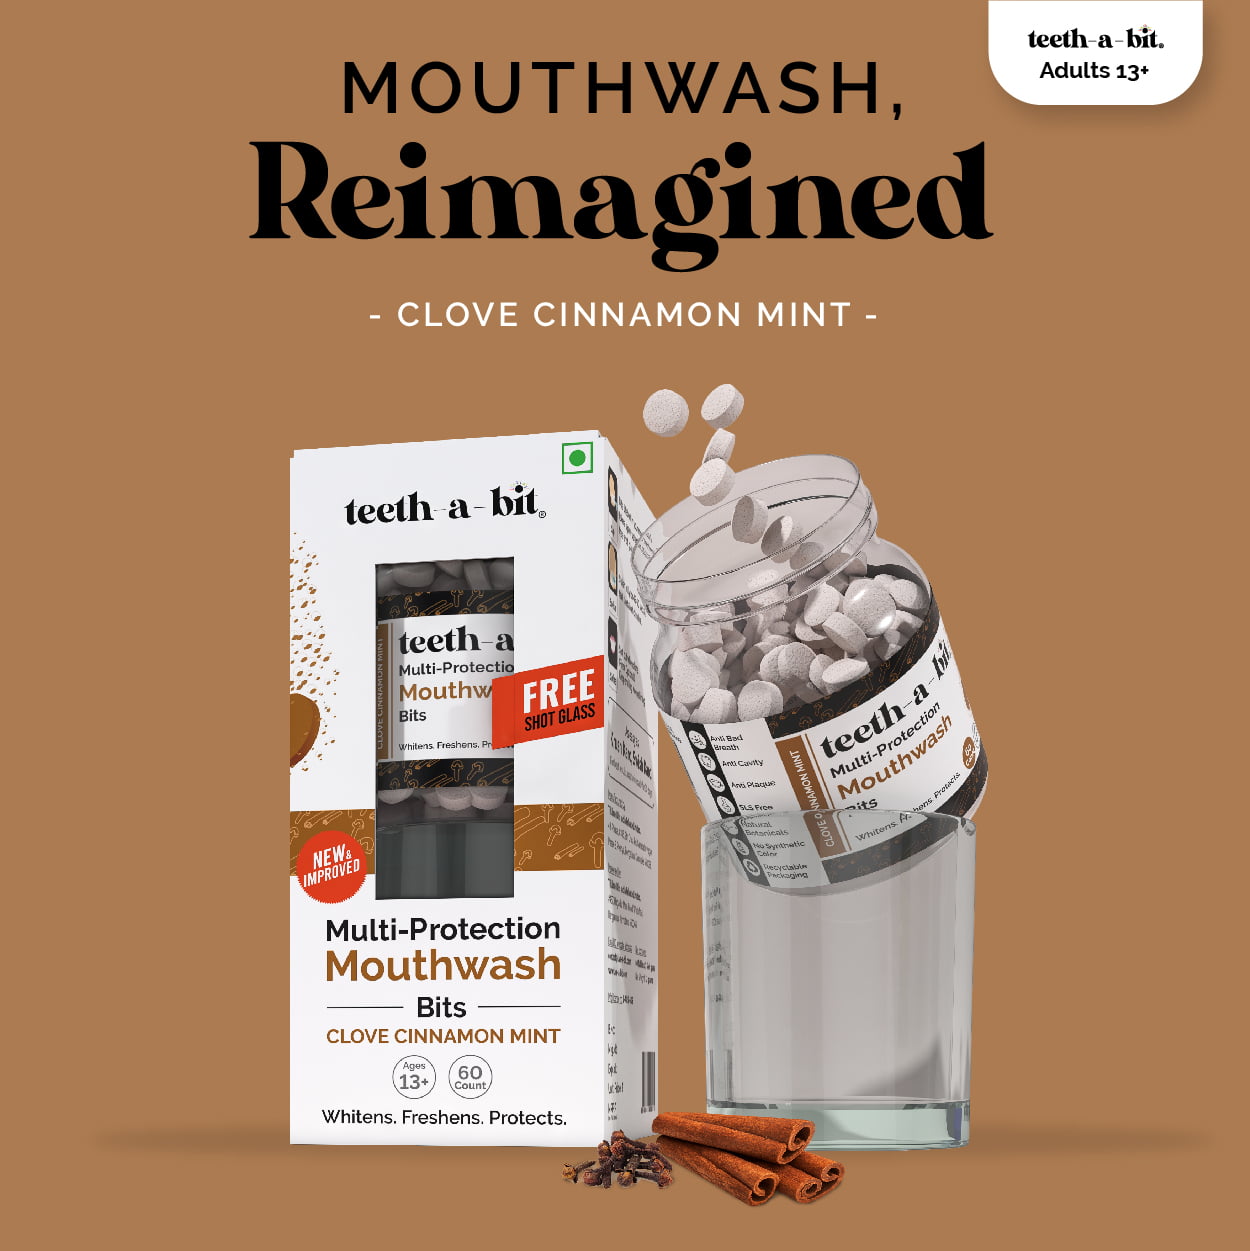 teeth-a-bit Multiprotection Clove Cinnamon Mint Mouthwash Bits |Equal to 1200ml of liquid mouthwash (60 Count)